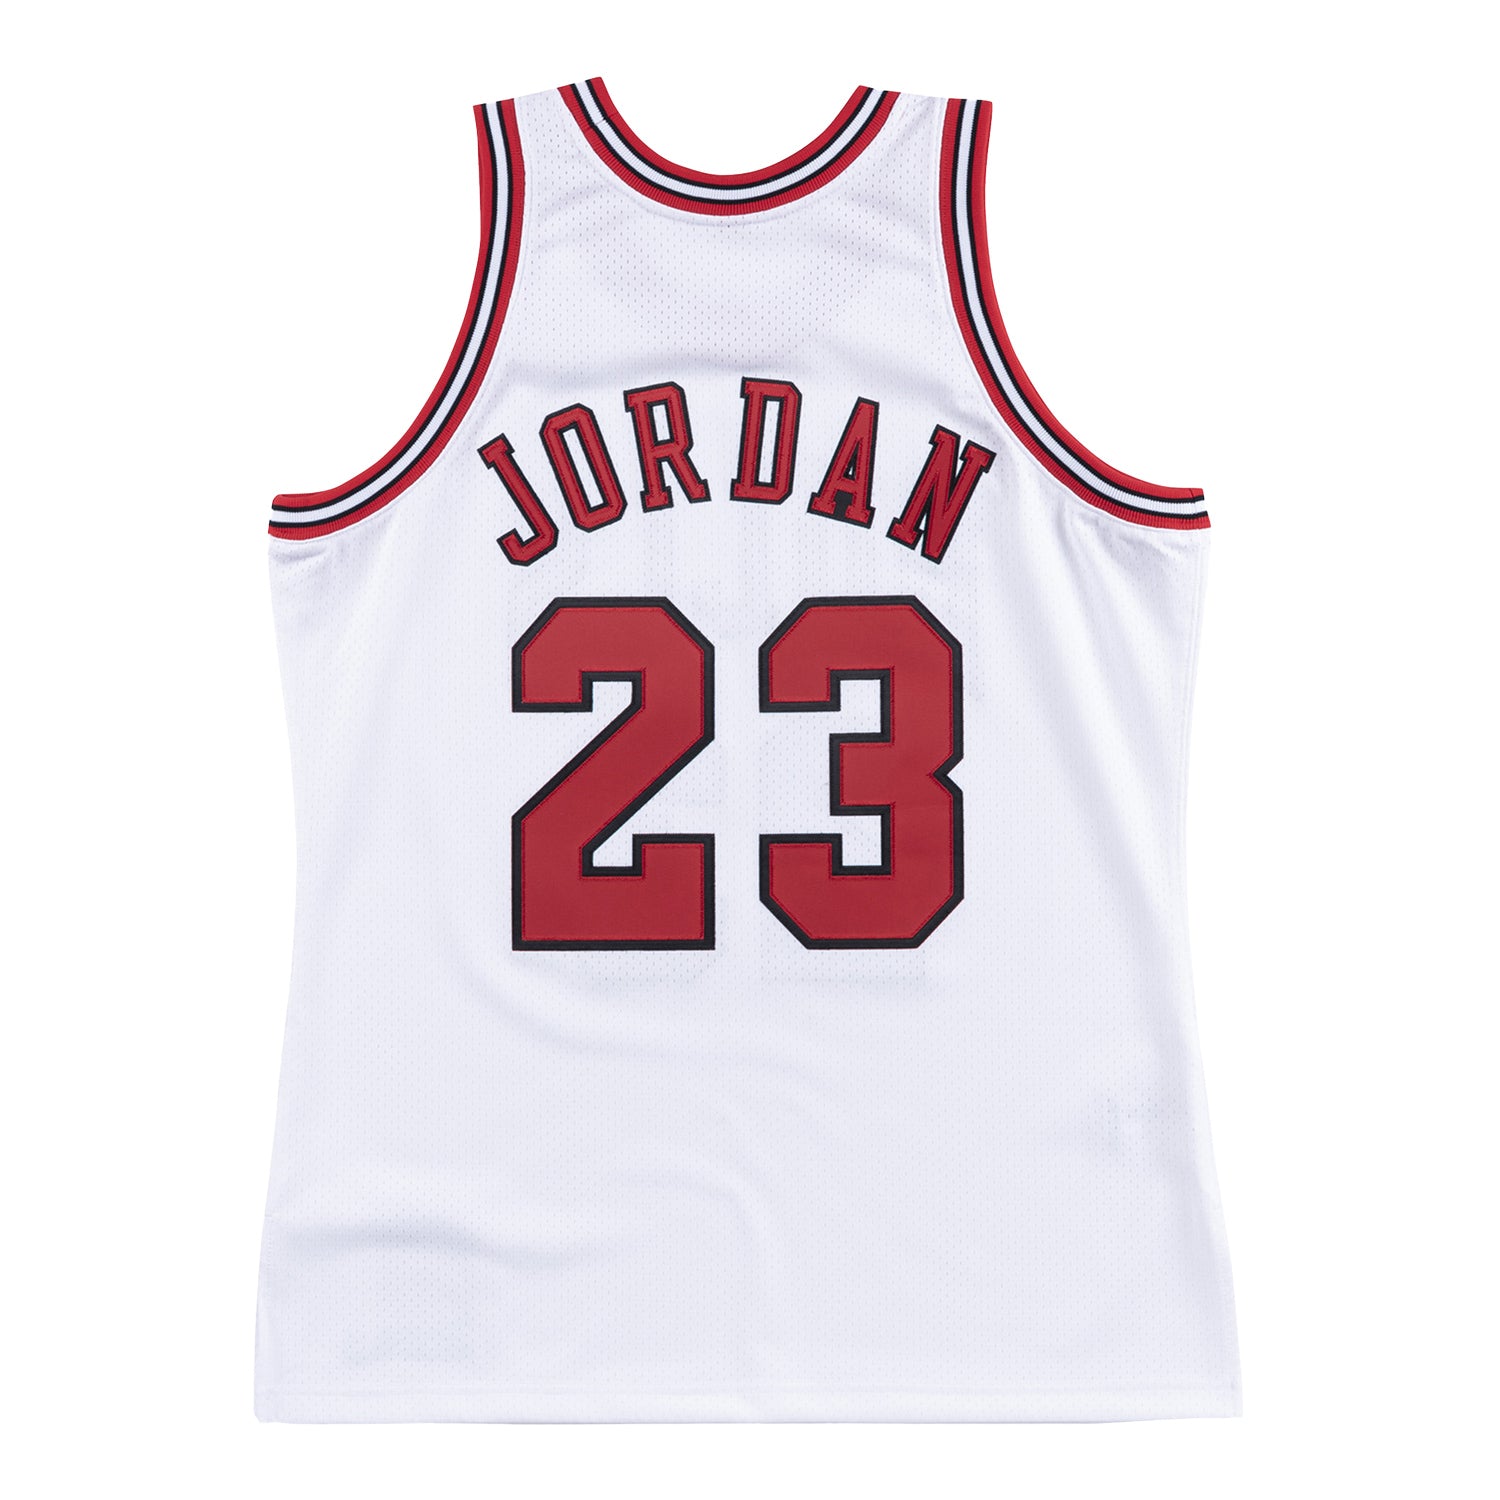 jersey with jordans